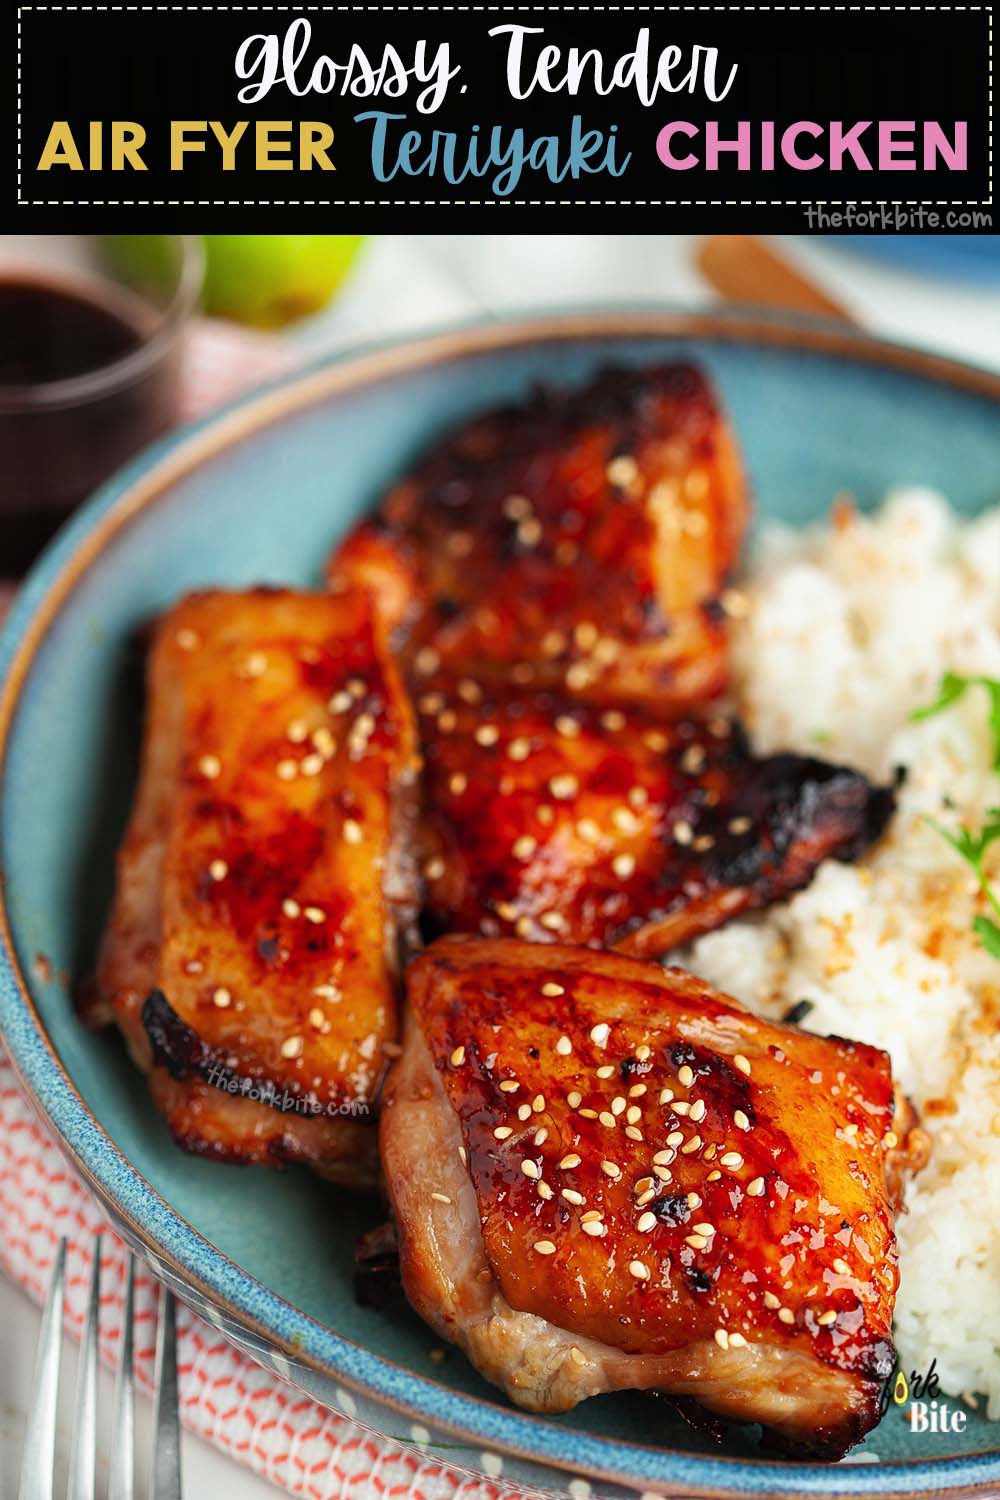 Air Fryer Teriyaki Chicken produces the most succulent, tasty, tender chicken imaginable, especially after being marinated in Teriyaki sauce.